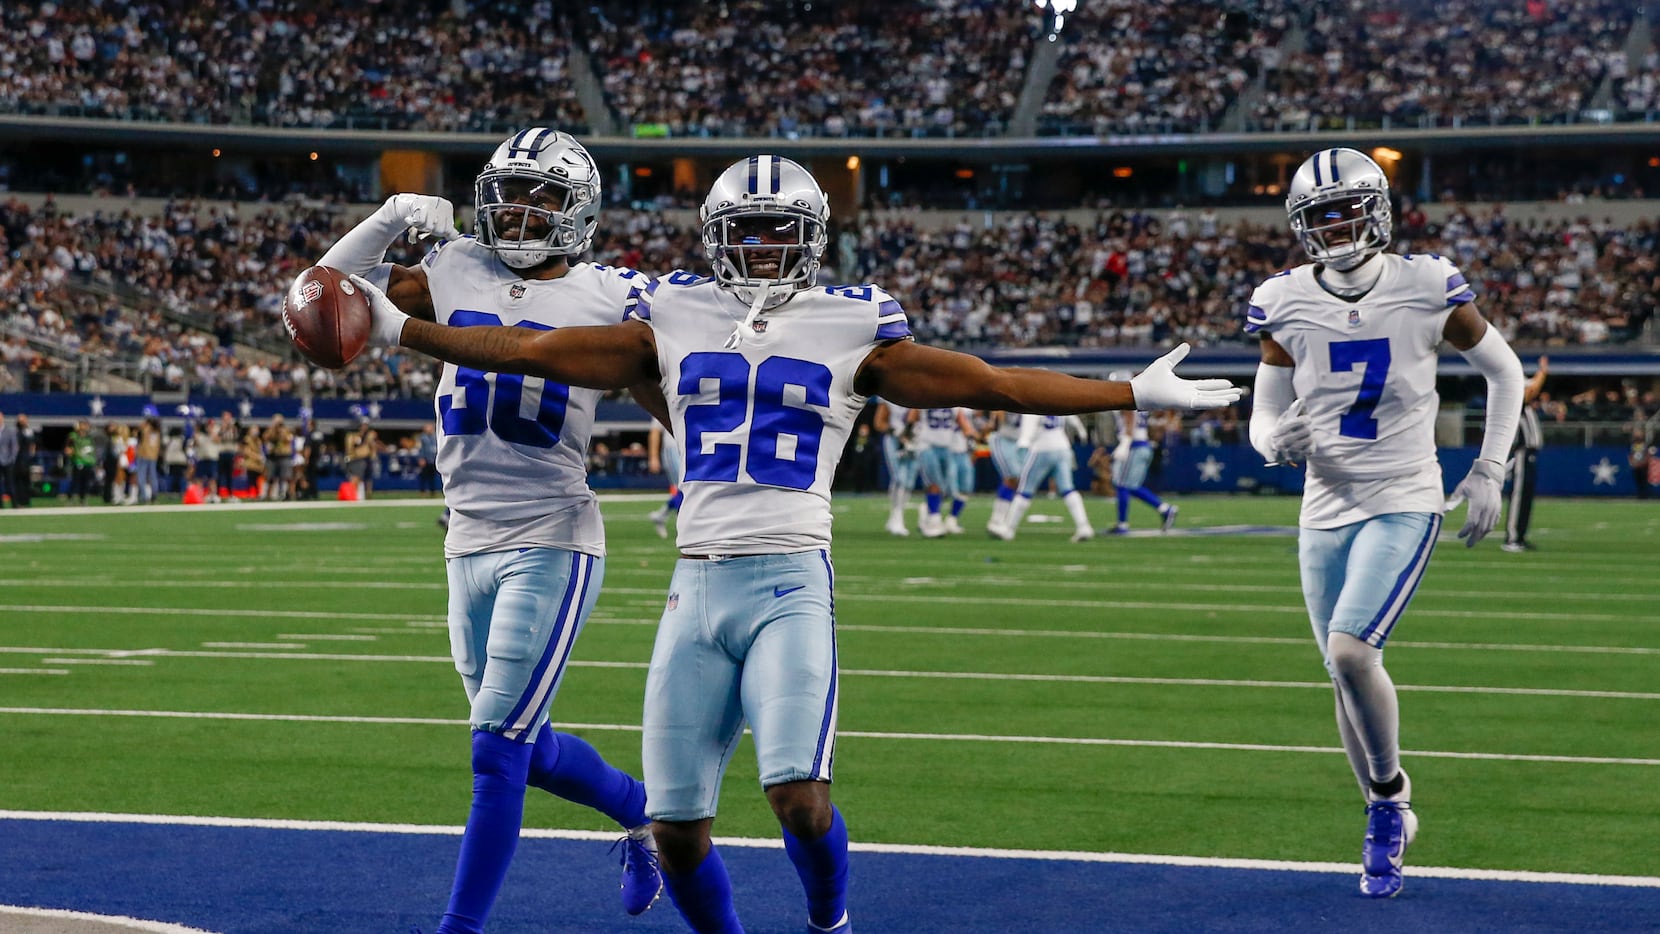 Led by a career performance from Jourdan Lewis, Cowboys defense  reestablished itself against Falcons